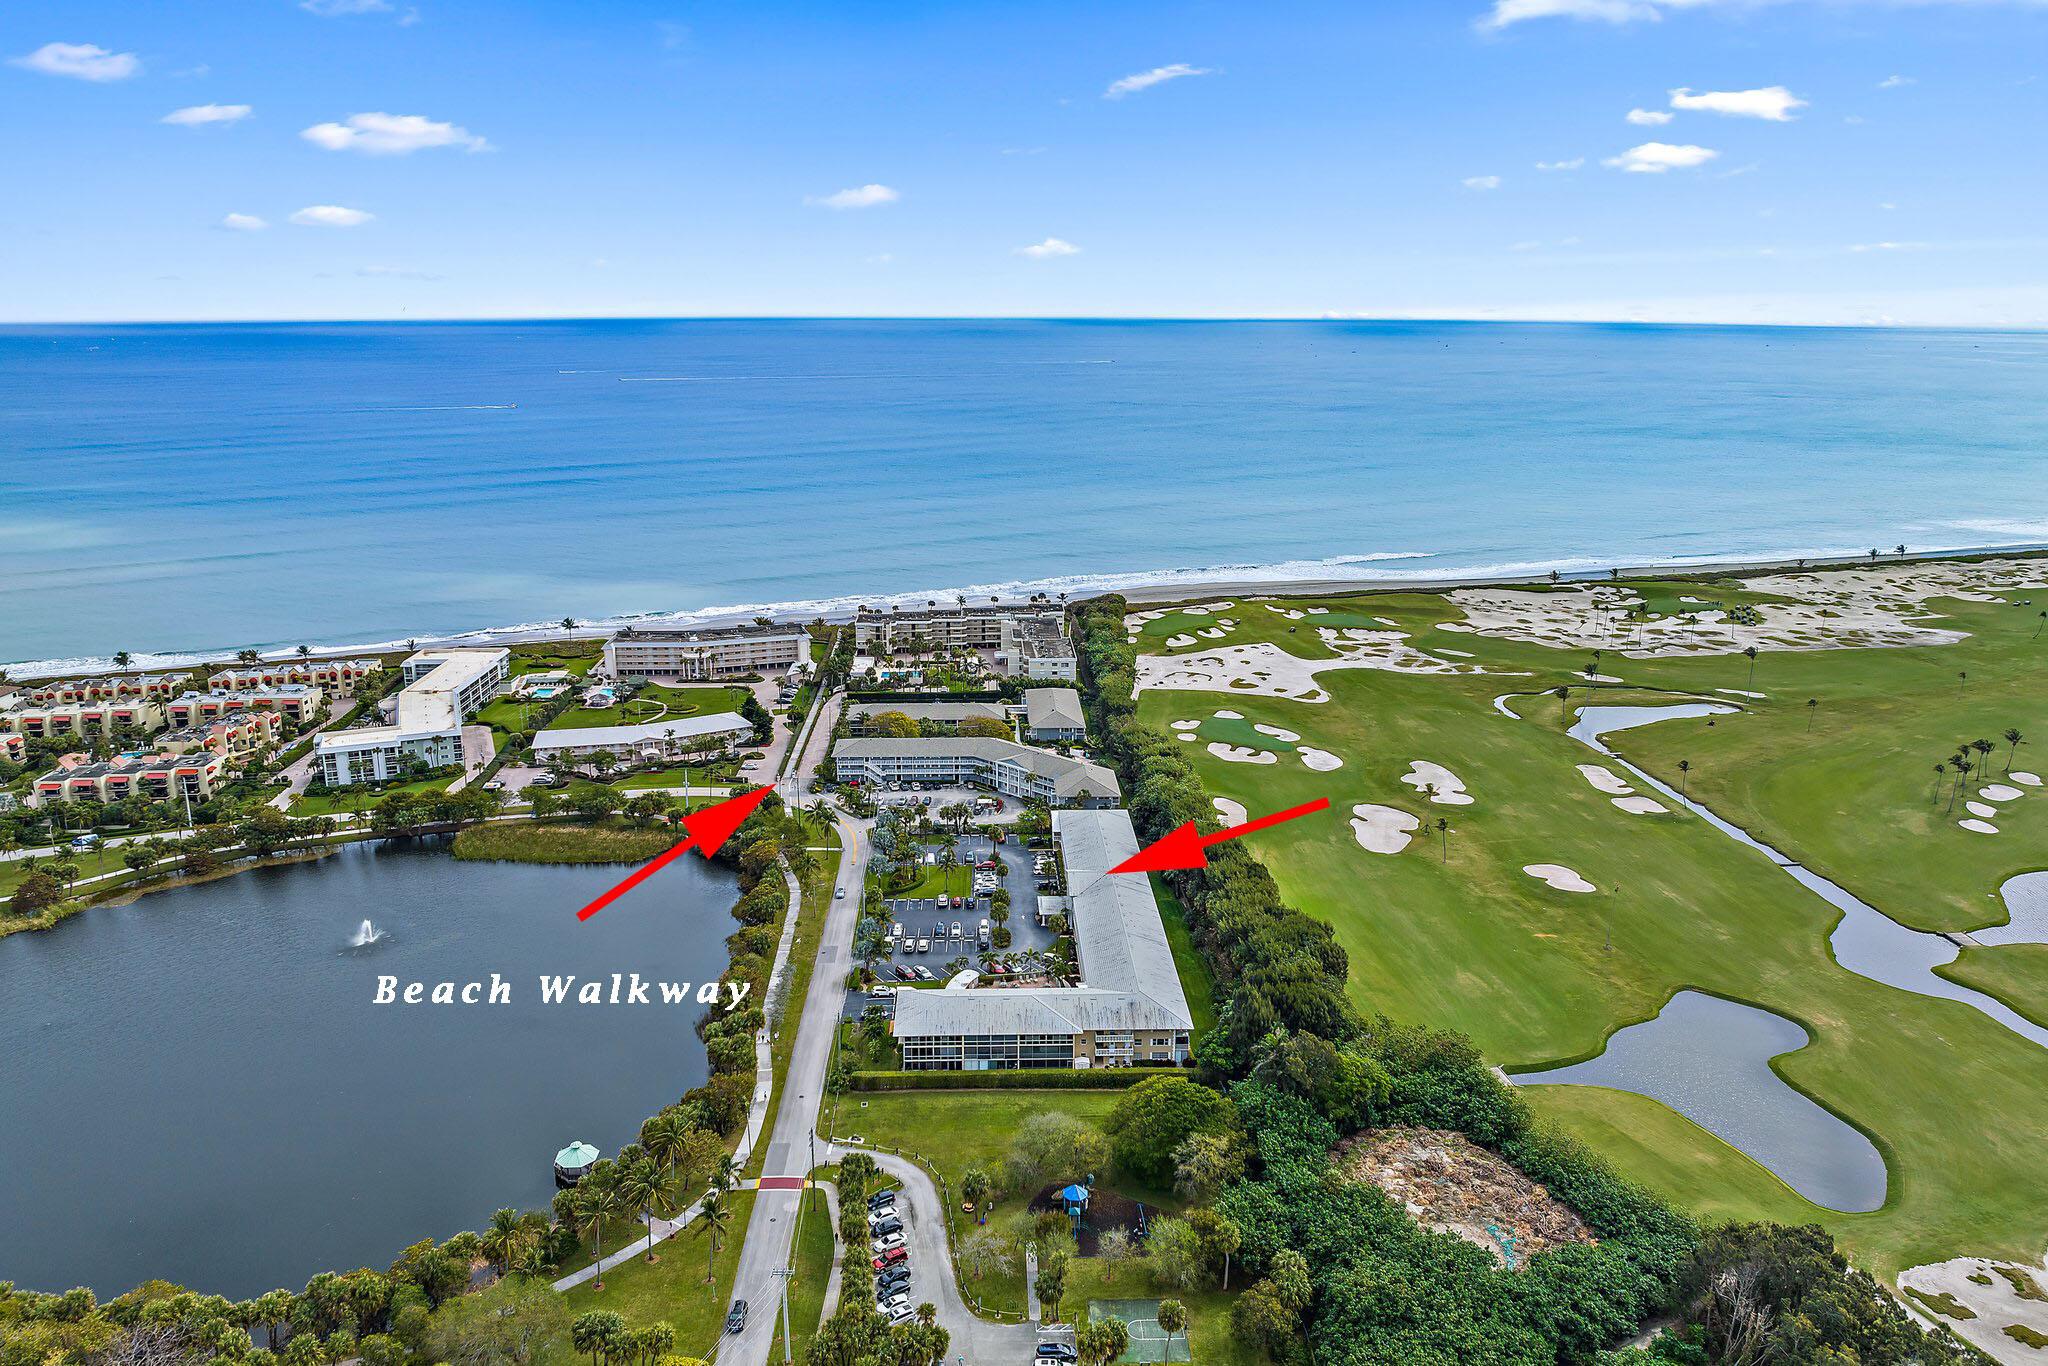 Enjoy Juno Beach living. Steps to the finest beach down your beach walkway and enjoy strolls around the Pelican Lake walking path. Largest condo(1,580 sq. ft) in the building with desirable Southern exposure  overlooking Seminole Golf Club. The top floor condo features a large patio with sliding glass windows. One of a few condos with own washer/dryer. Nicely updated with newer kitchen and bath cabinets & granite counters. Minutes to great restaurants and shopping. Come see what makes Juno Beach one the the favorite towns in Palm Beach County.